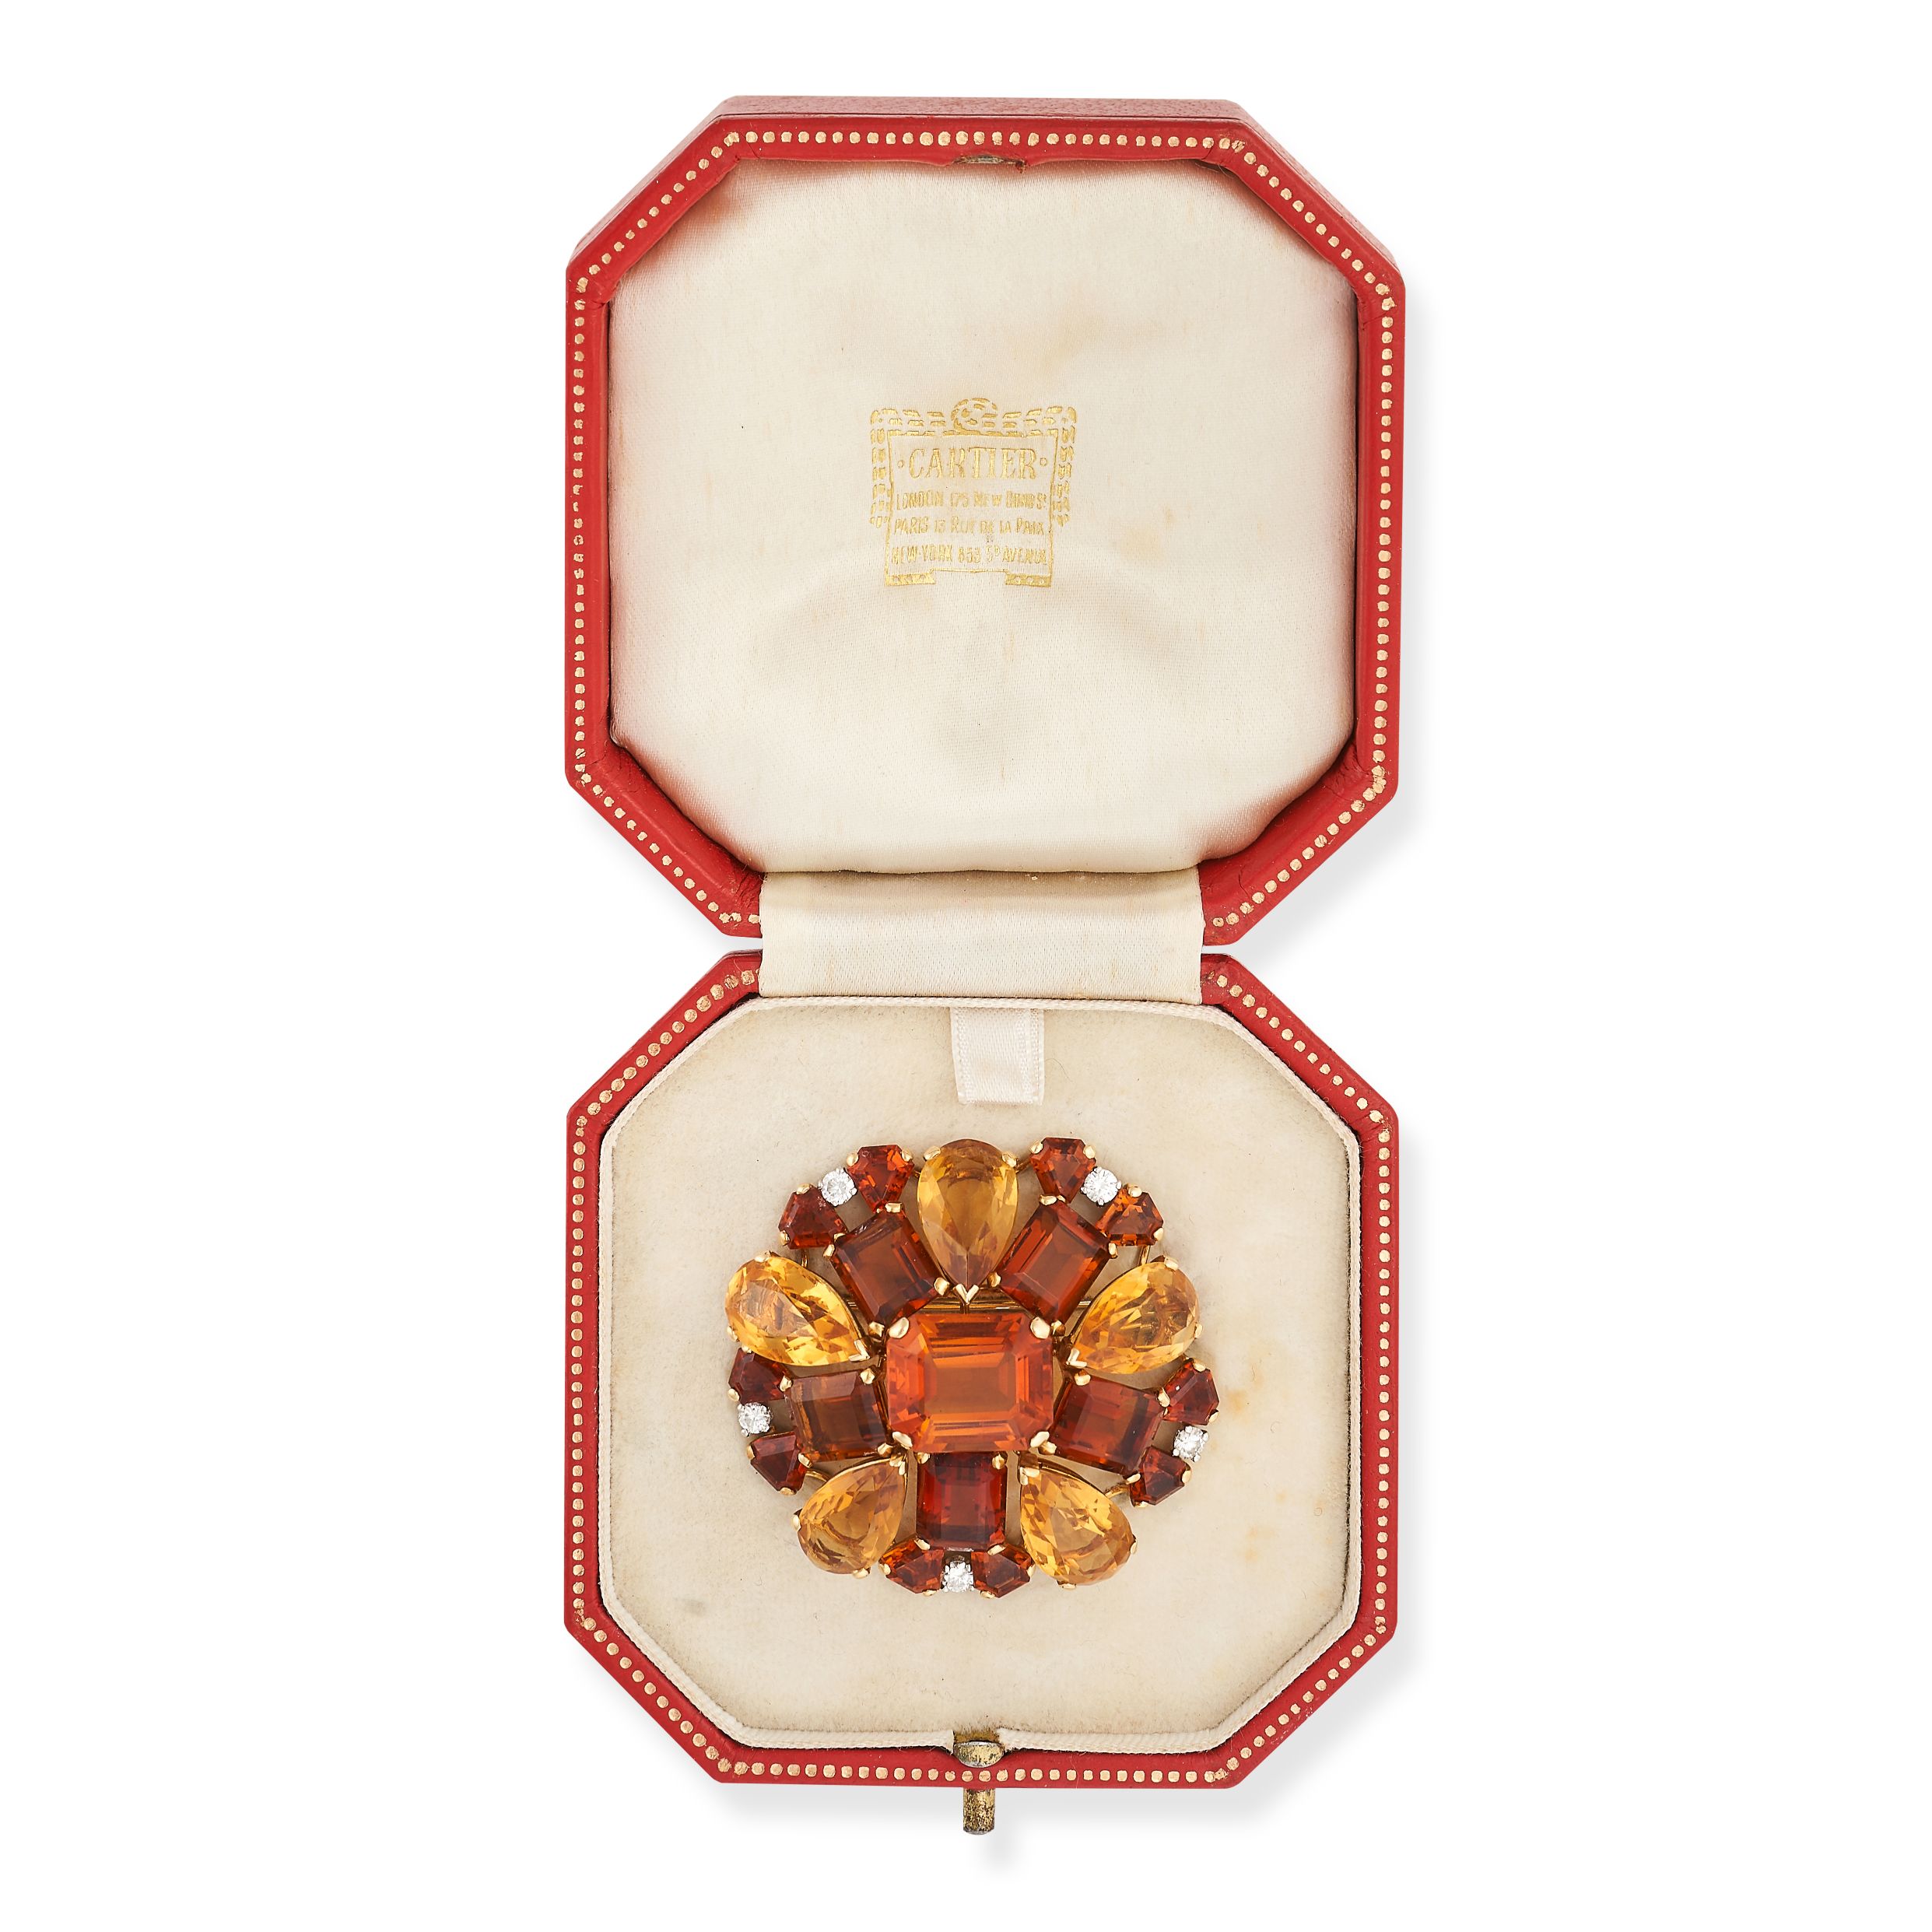 CARTIER, A VINTAGE CITRINE AND DIAMOND BROOCH, 1940s in 18ct yellow gold, designed as a floral - Image 2 of 3